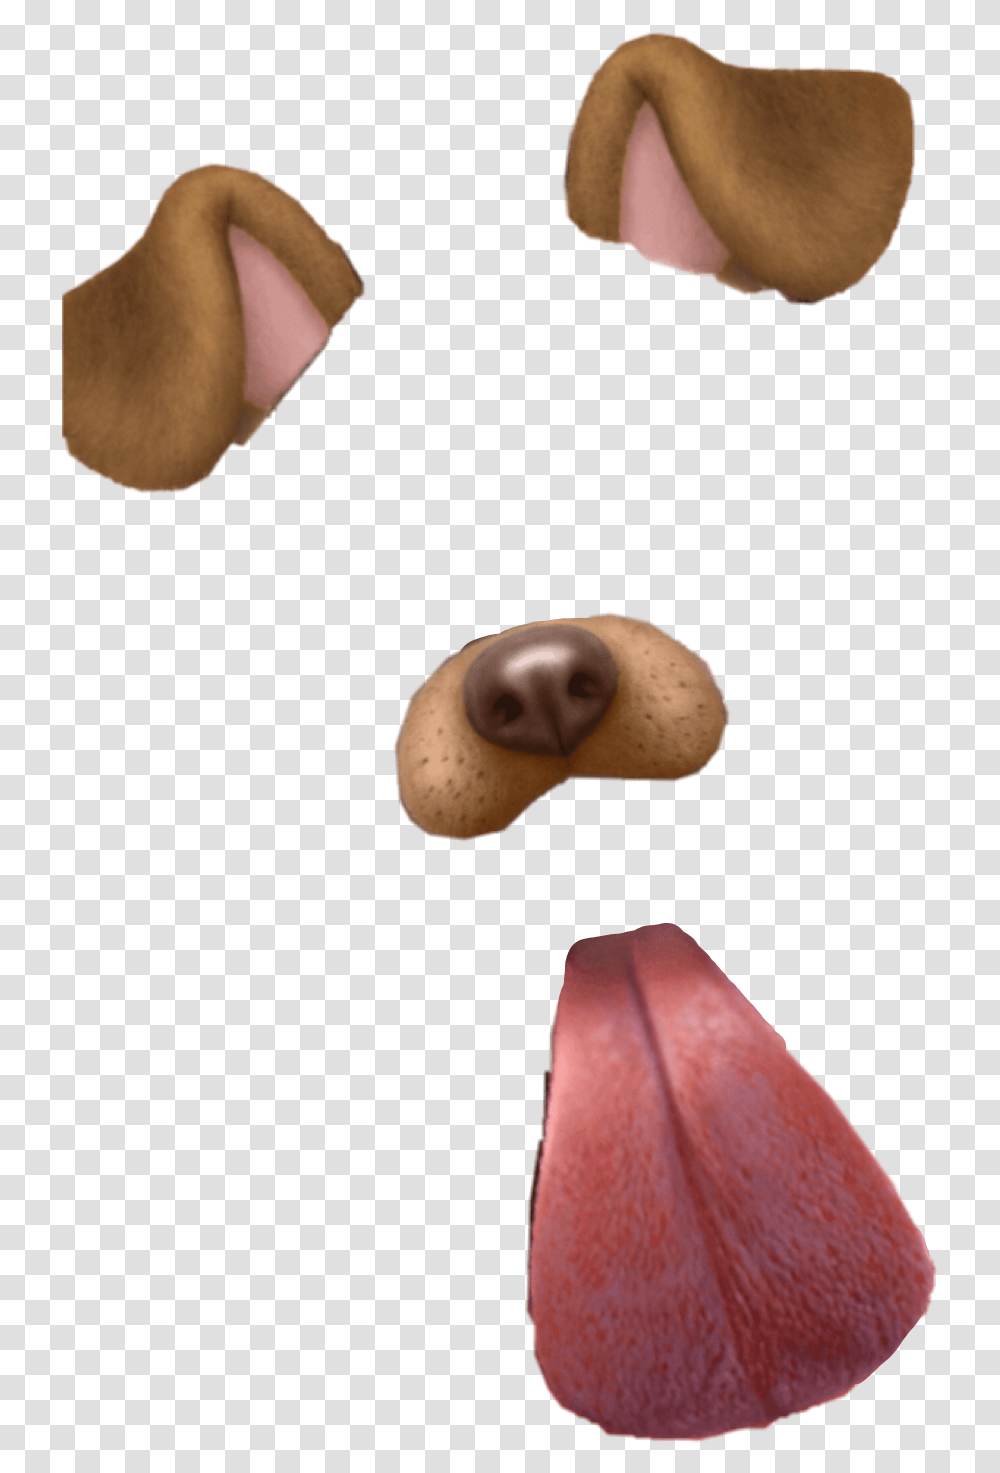 Dog Dogfilter Snapchat Snapchatfilter Tongueout Pictographic Writing System, Person, Lamp, Cutlery, Snail Transparent Png